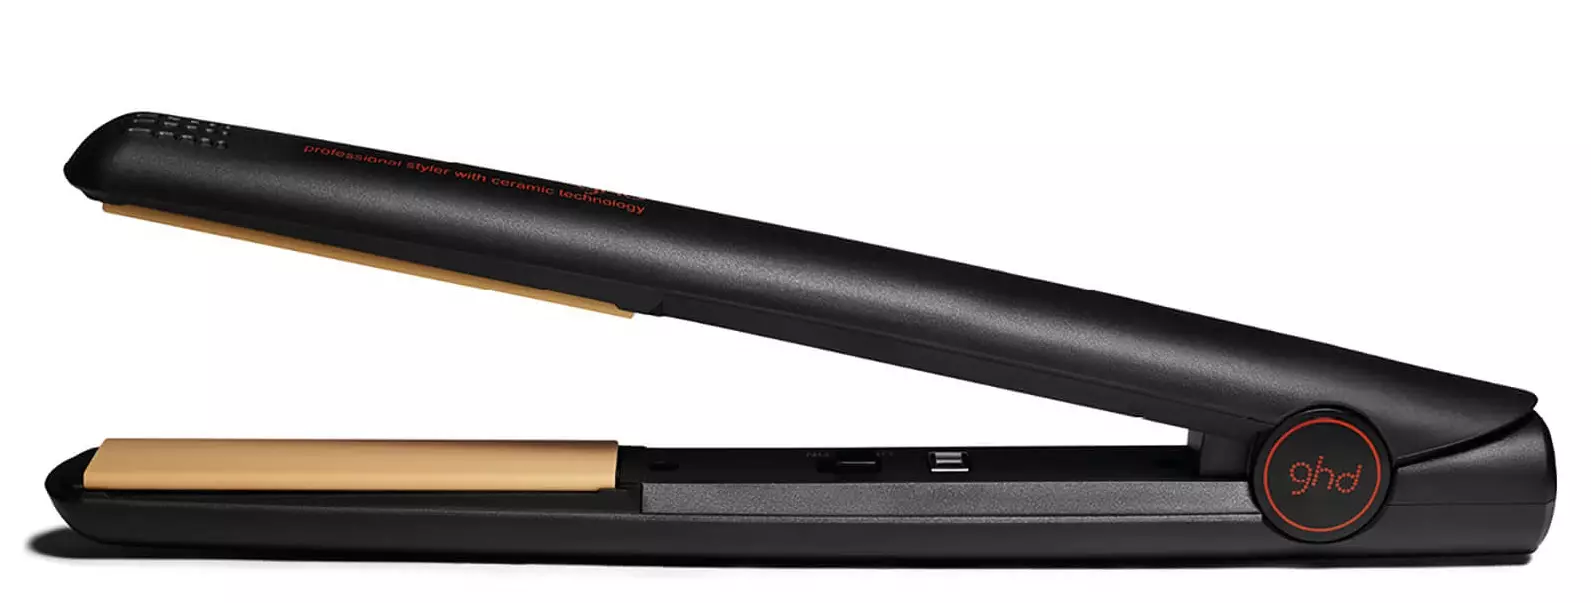 Beauty lovers can also pick up a GHD original styler for £76 instead of £109 (